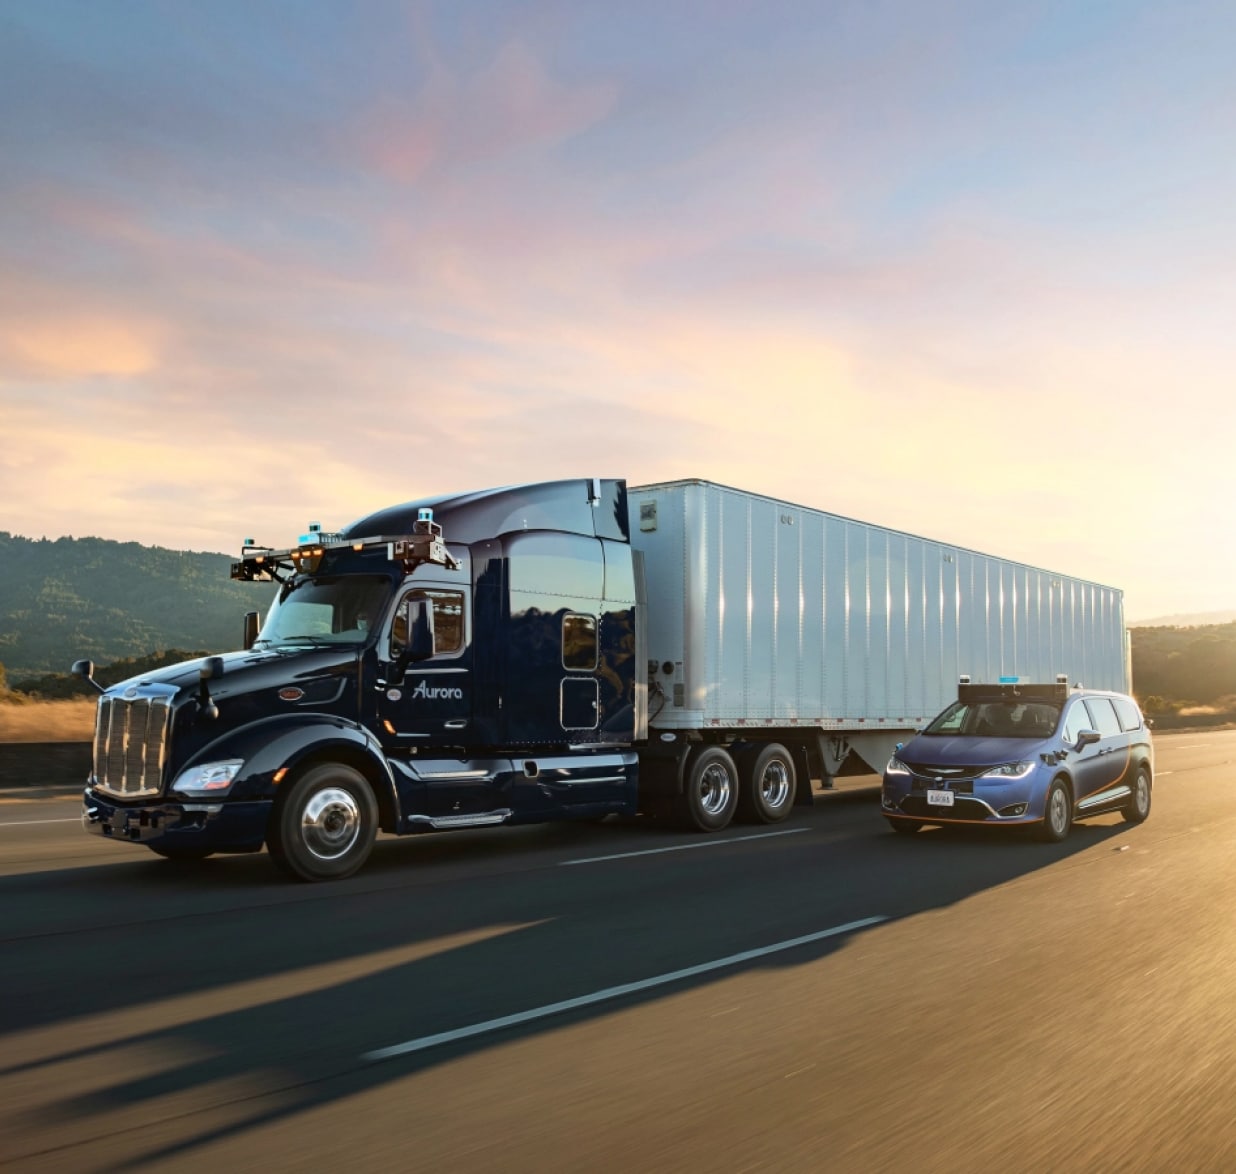 Dedicated Fleets – Capacity and Value - Uber Freight